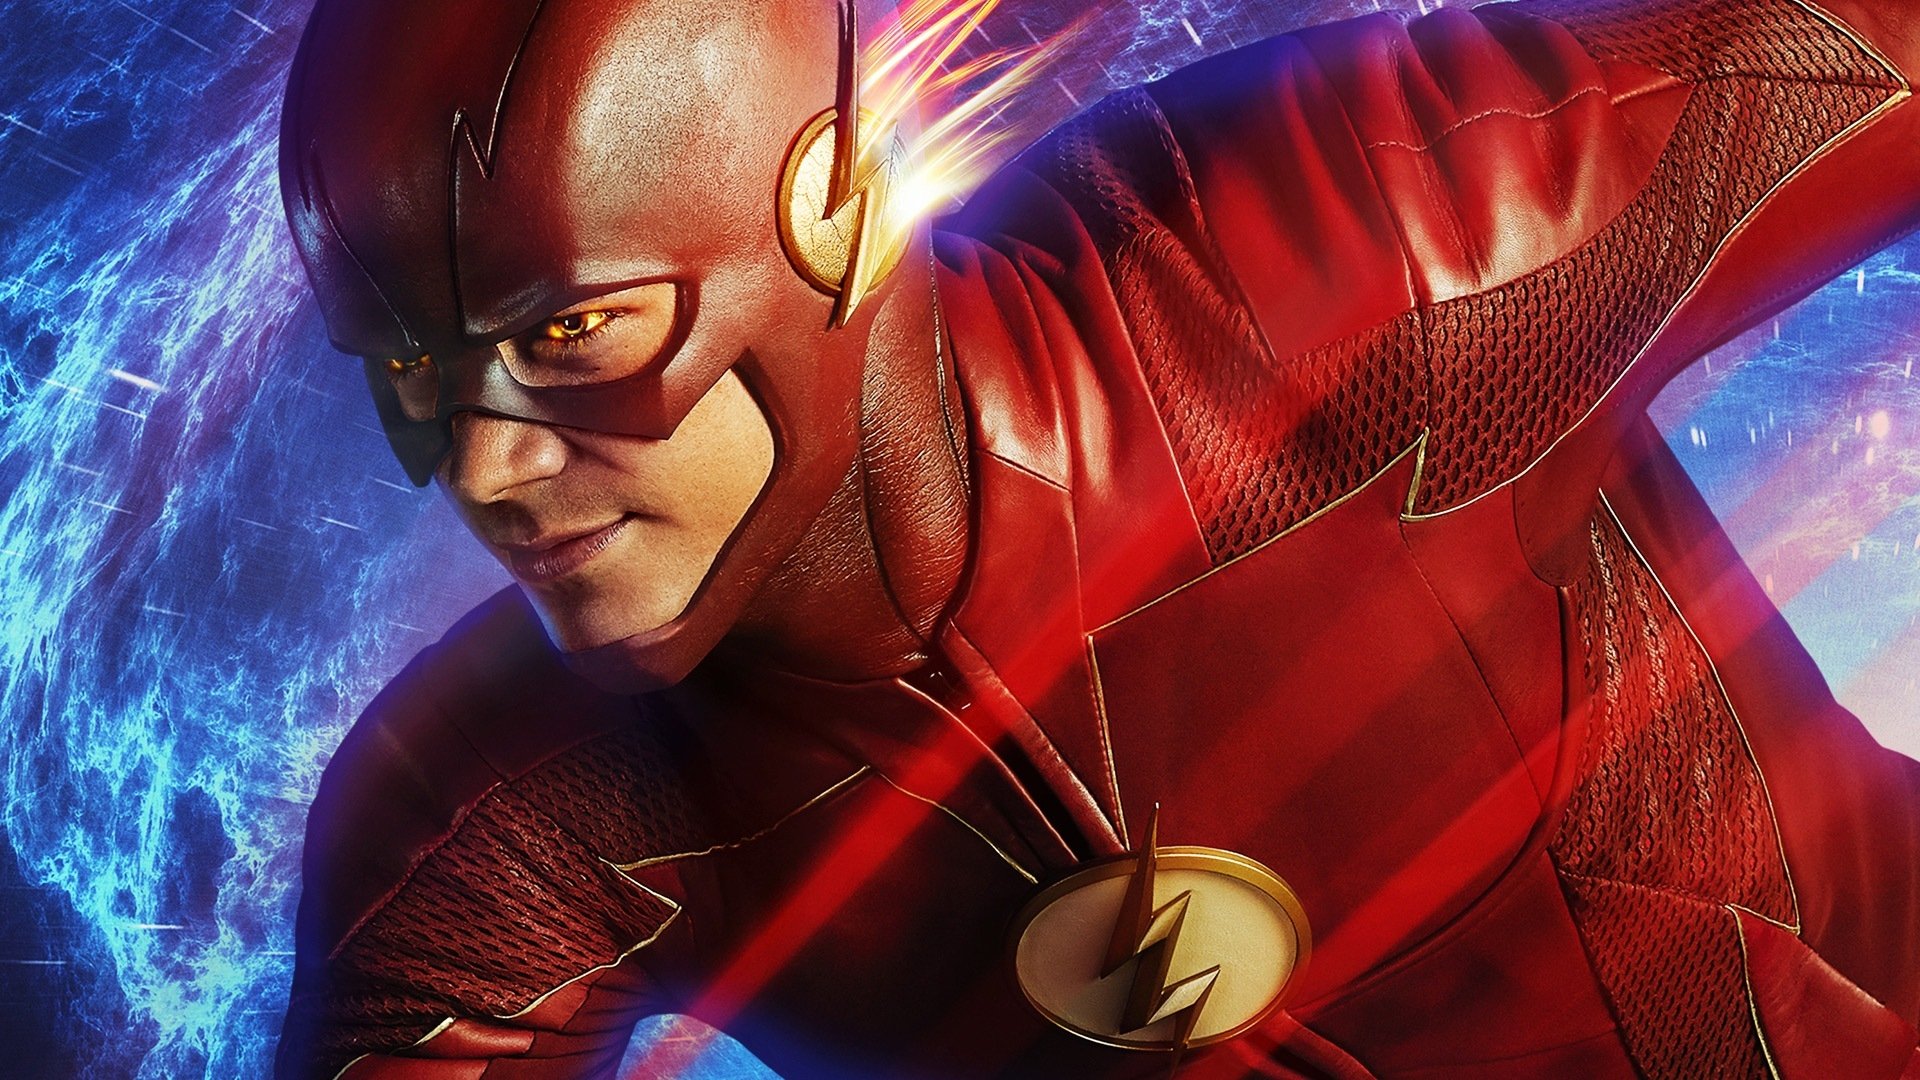 The Flash (2014) HD Wallpaper | Background Image 